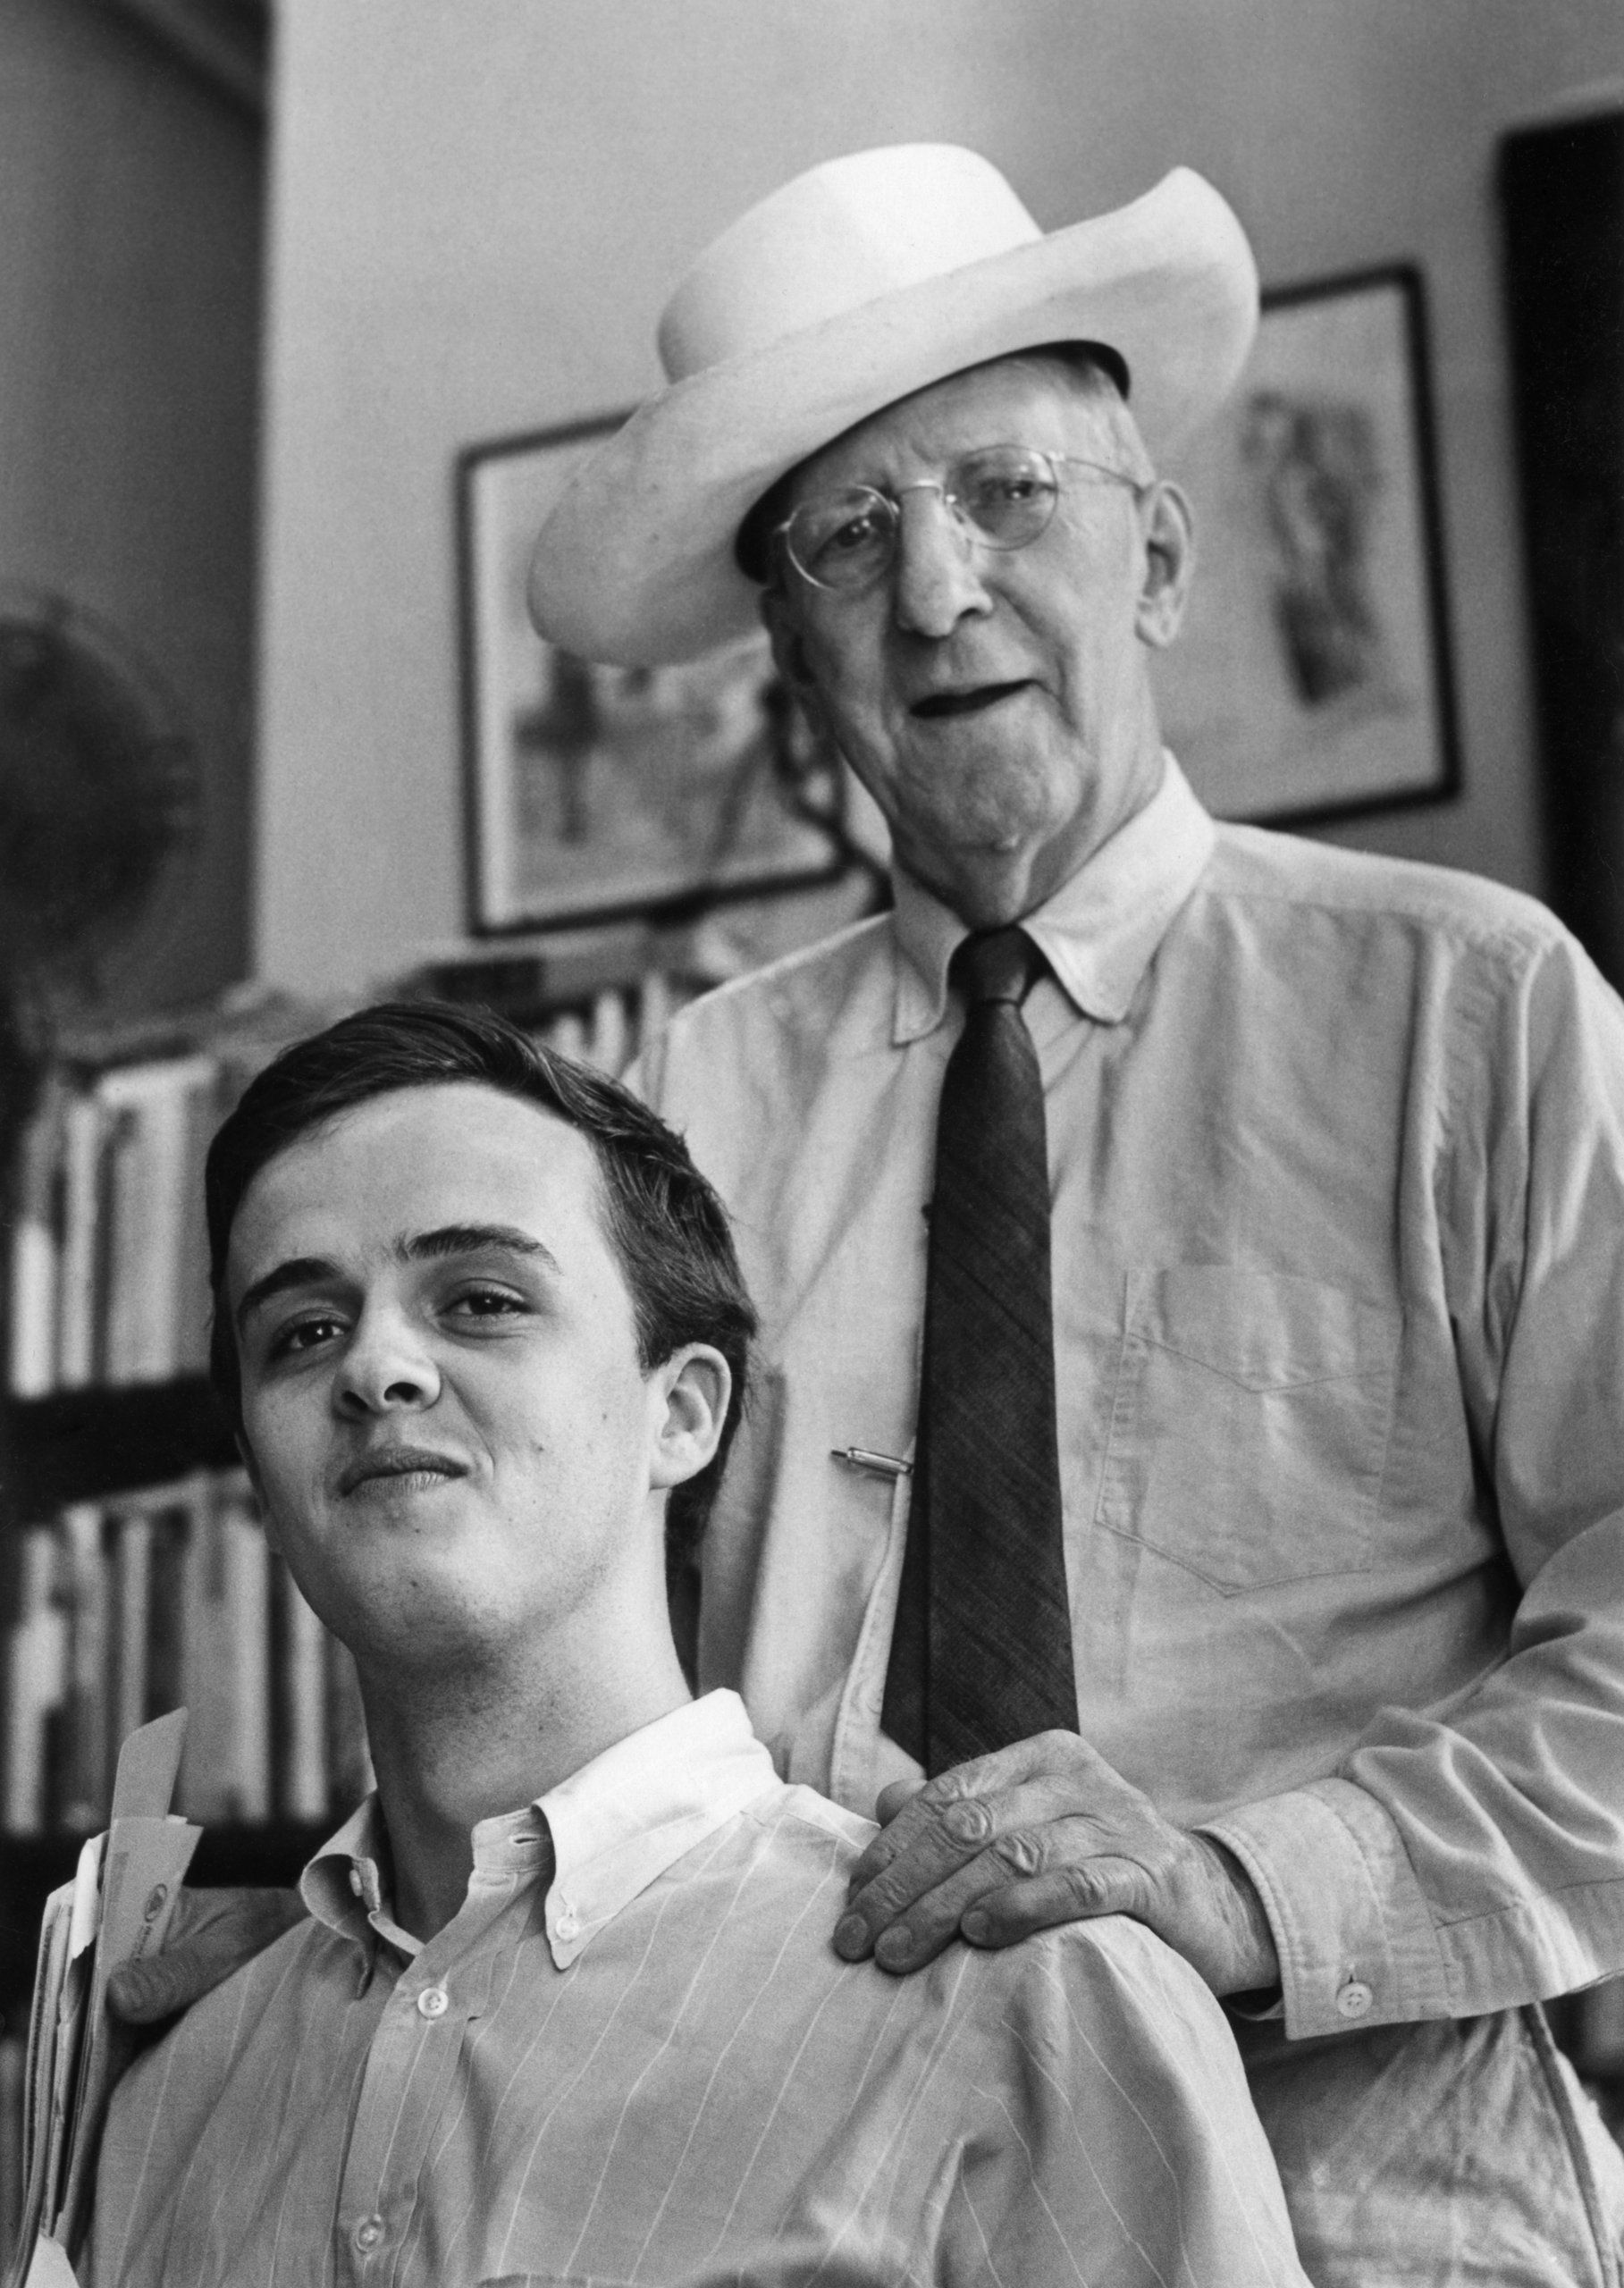 James Tate (left), Pulitzer Prize winner (1992) and MFA graduate of Iowa University , at the Grolier Book Store in 1965 with the owner, Gordon Cairnie. Photo by Elsa Dorfman.